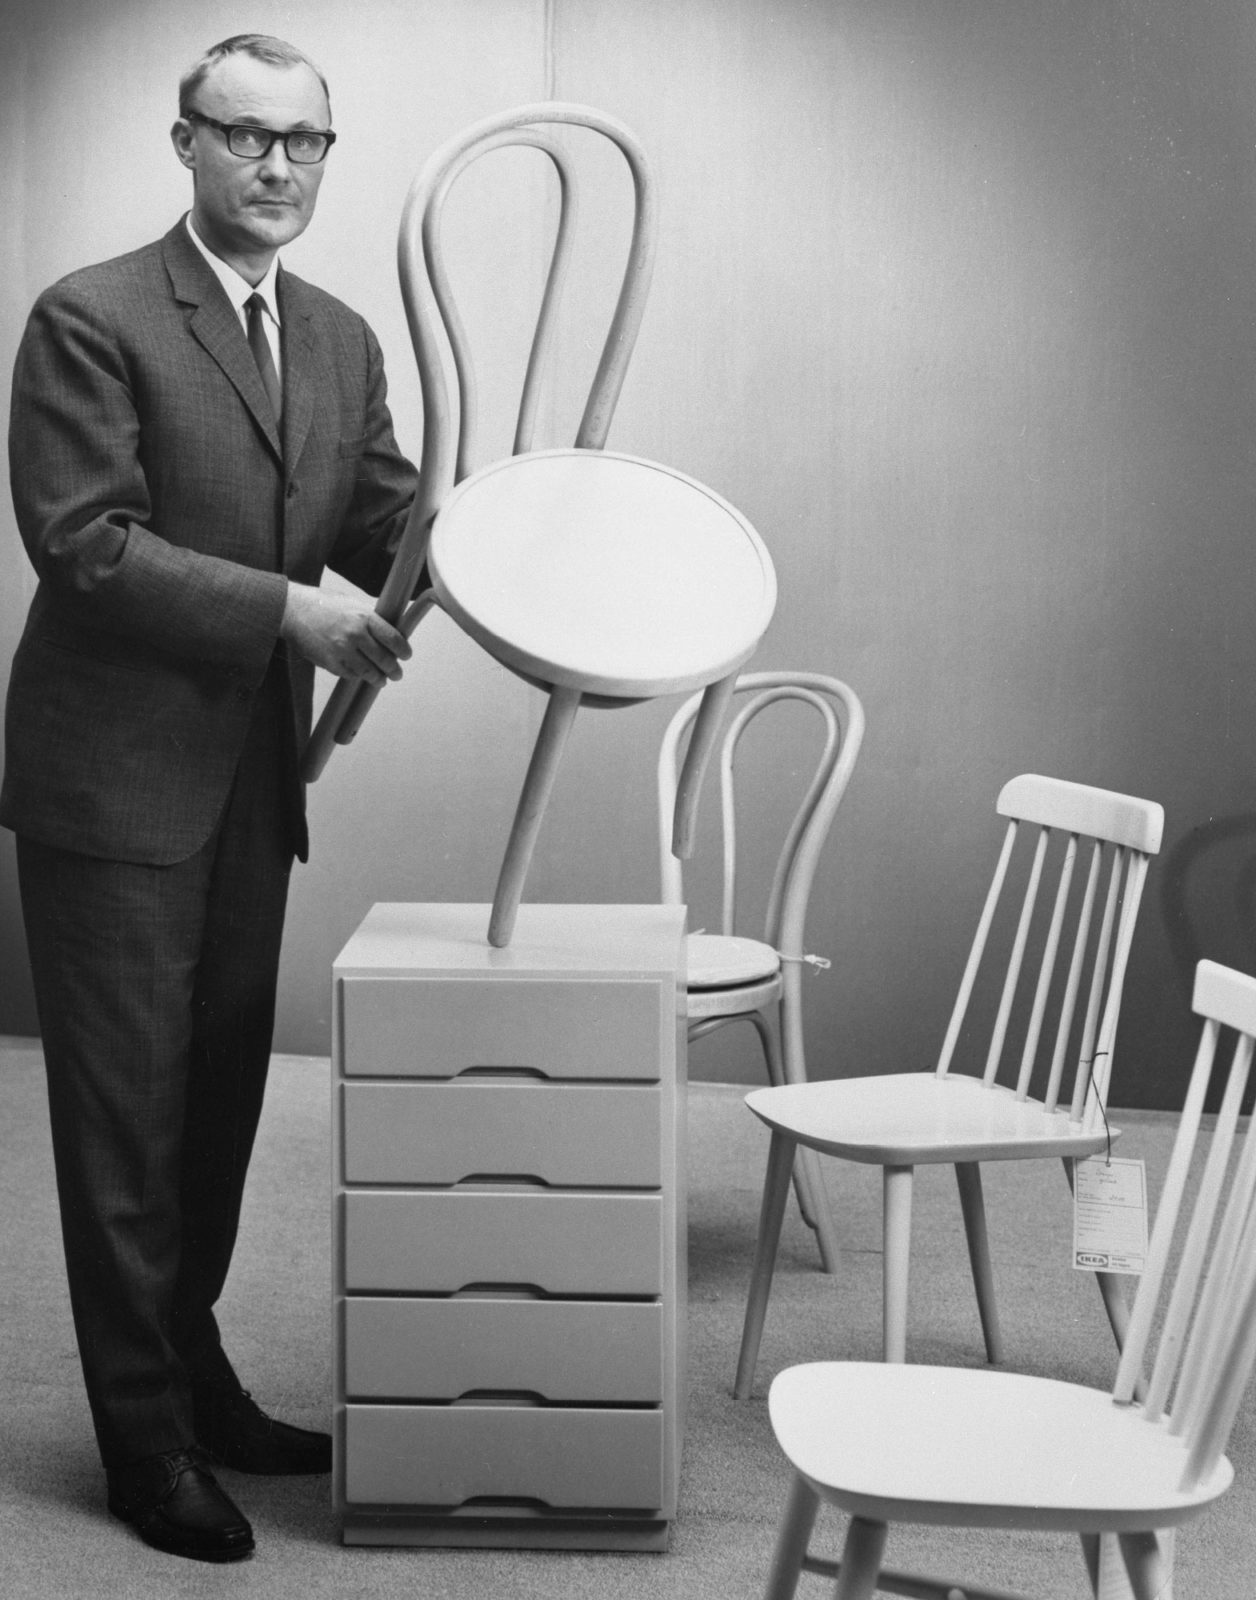 Ingvar Kamprad holding up white chair, next to 2 pin chairs and dresser, all white.